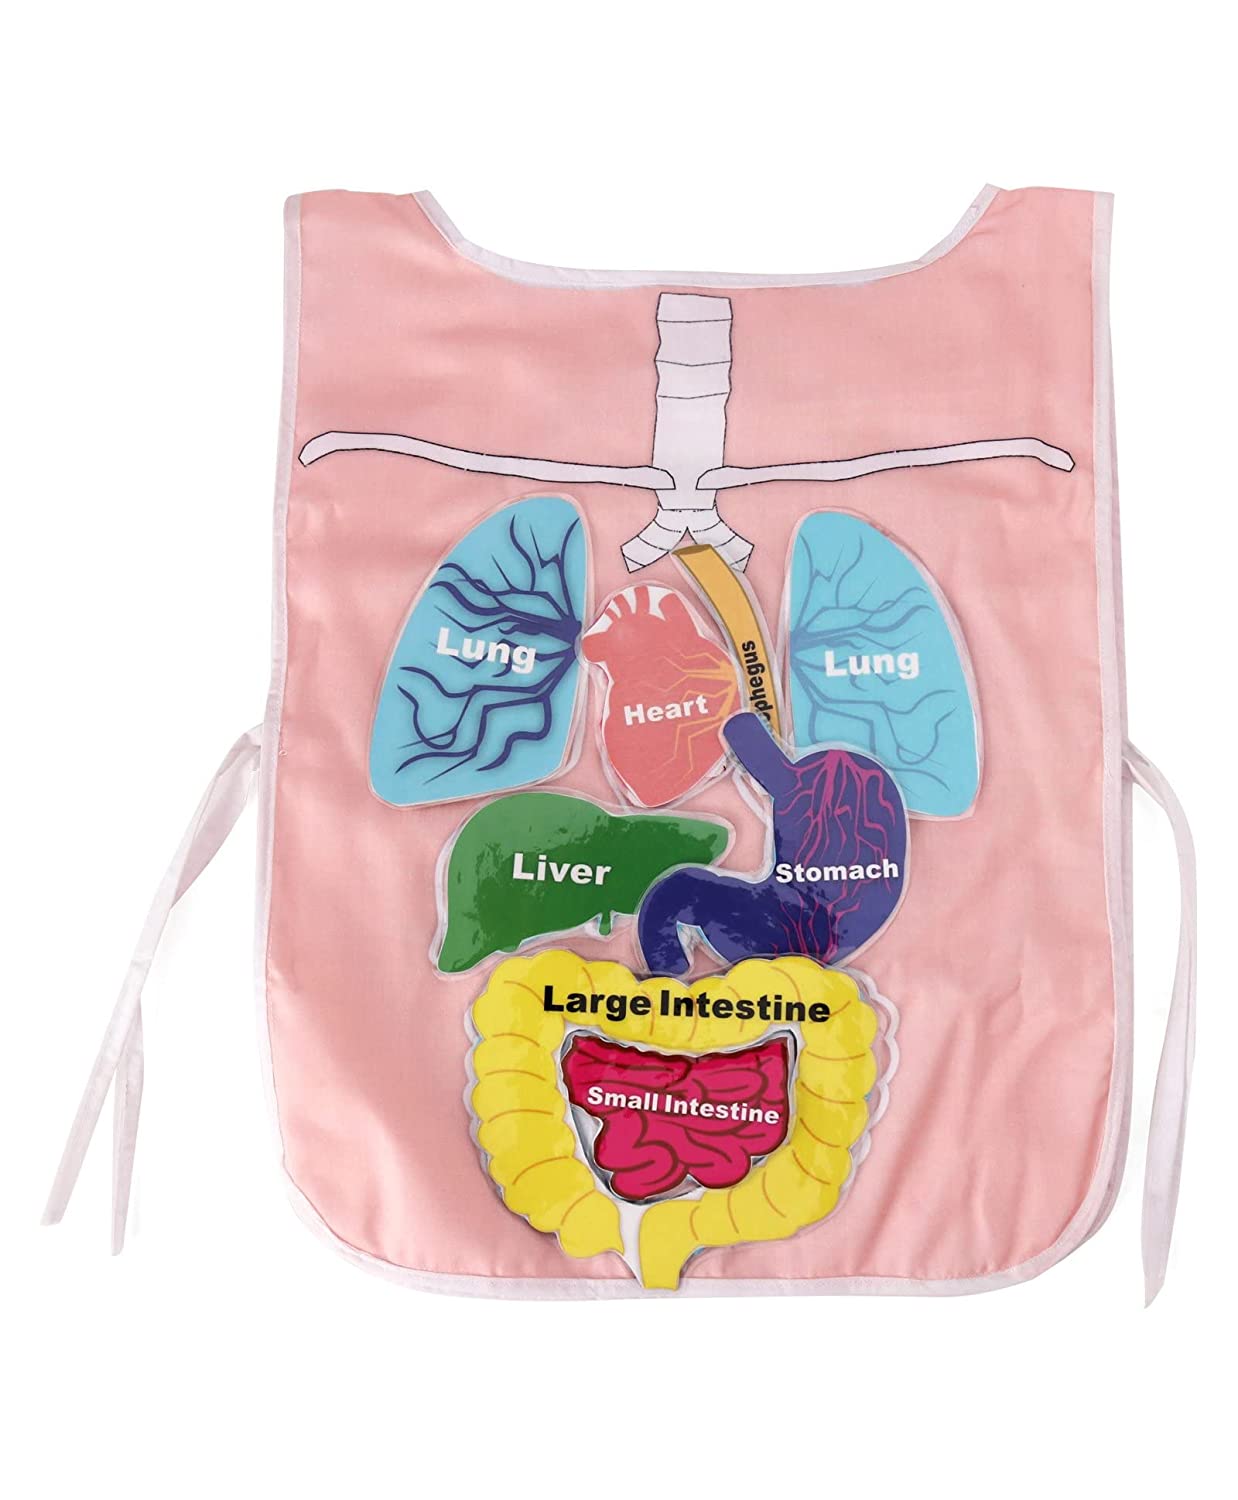 Personalised Apron, Aprons For Women, Kitchen Apron Apron To Teach 11 Internal Body Parts